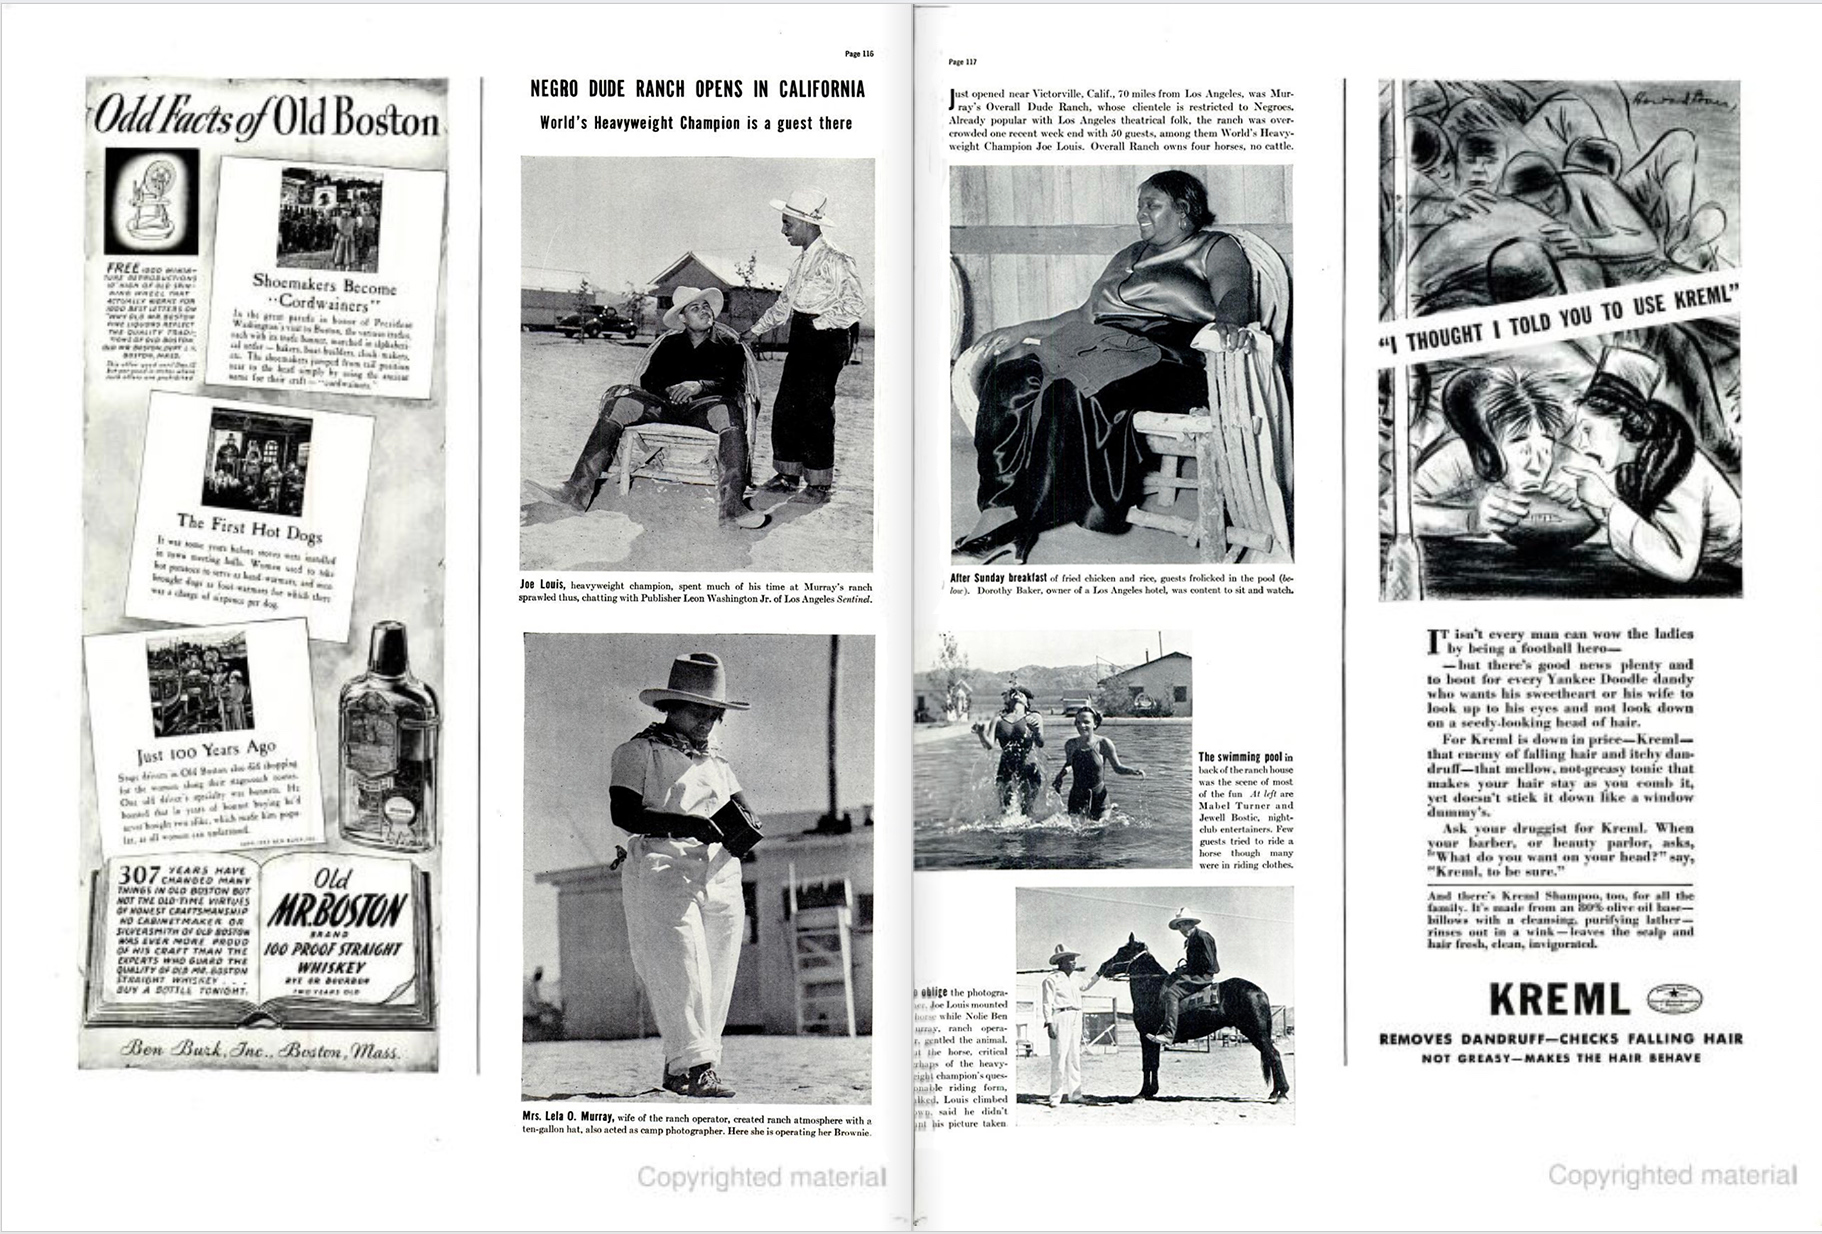 Two pages from Life Magazine, November 15, 1937. They show several pictures of people enjoying themselves at the Murray Ranch, including boxer Joe Louis.